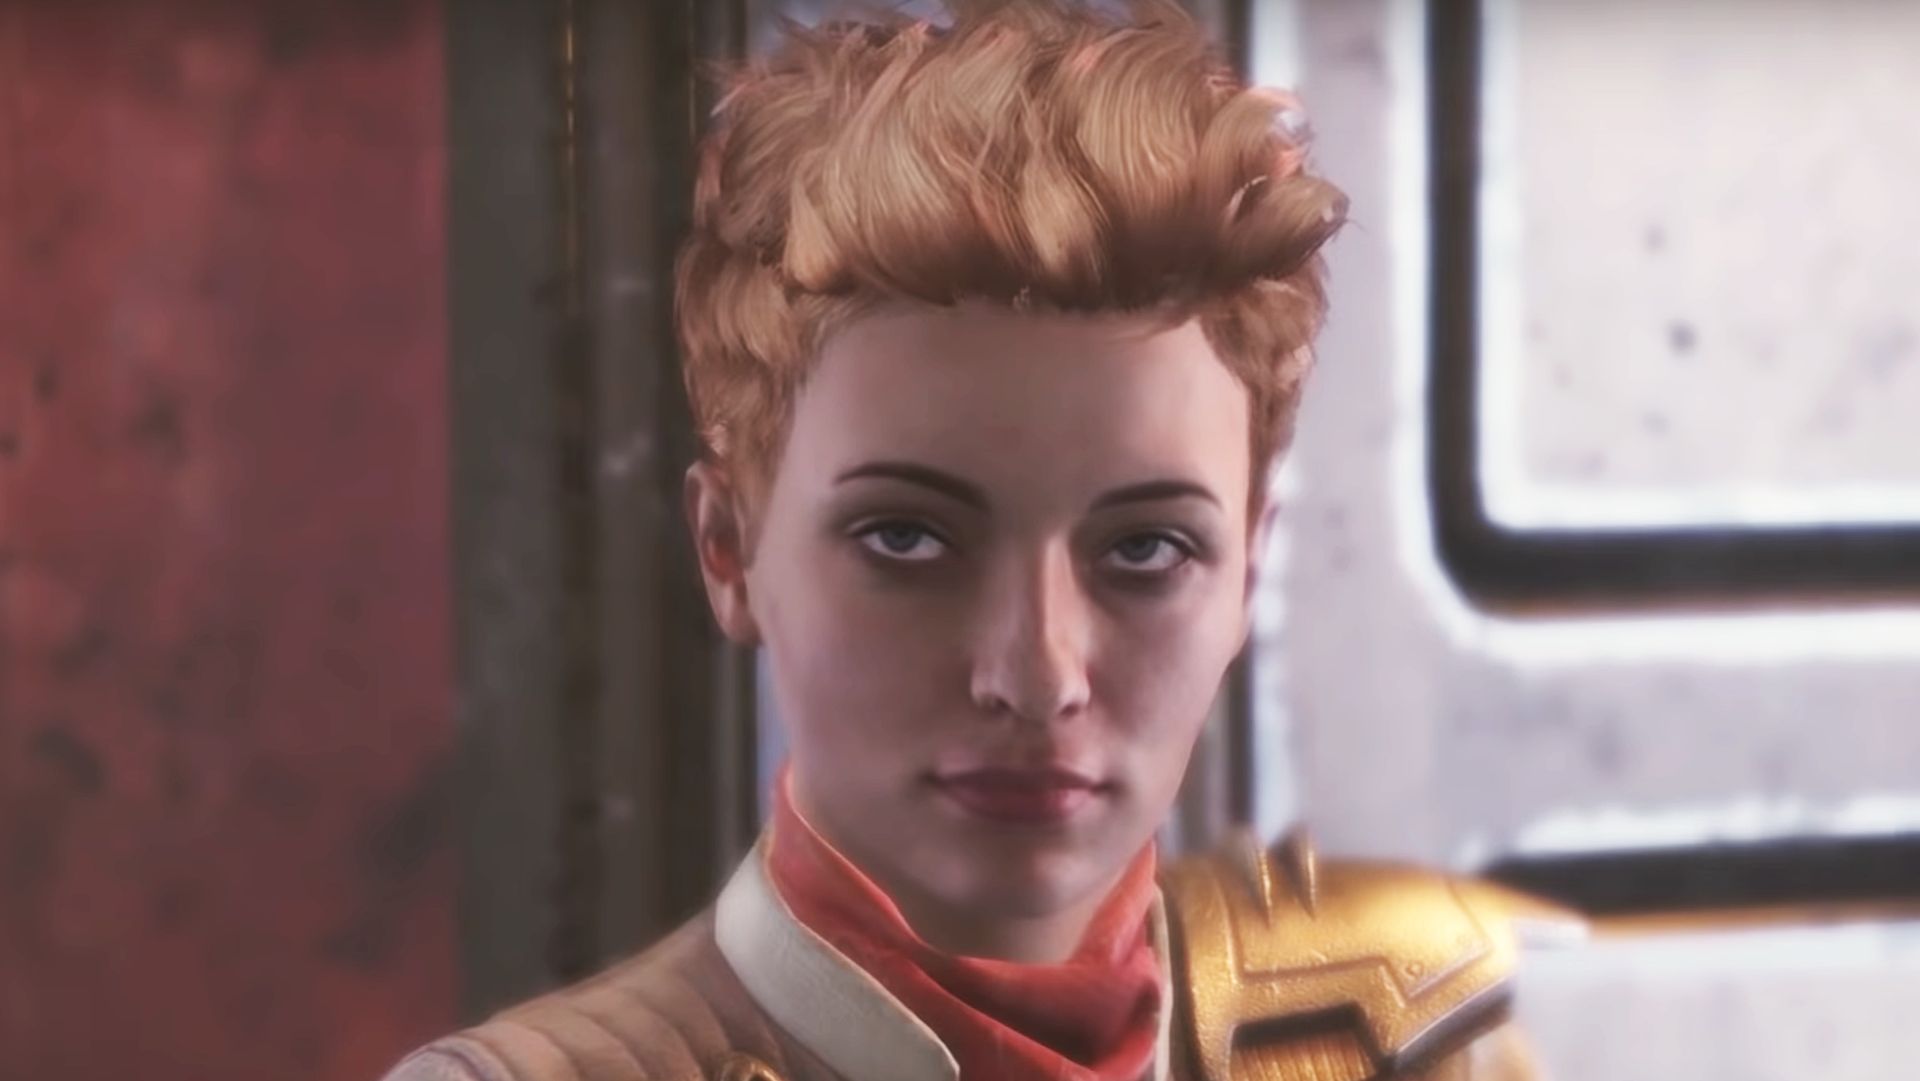 Outer Worlds: Is There Romance? Answered